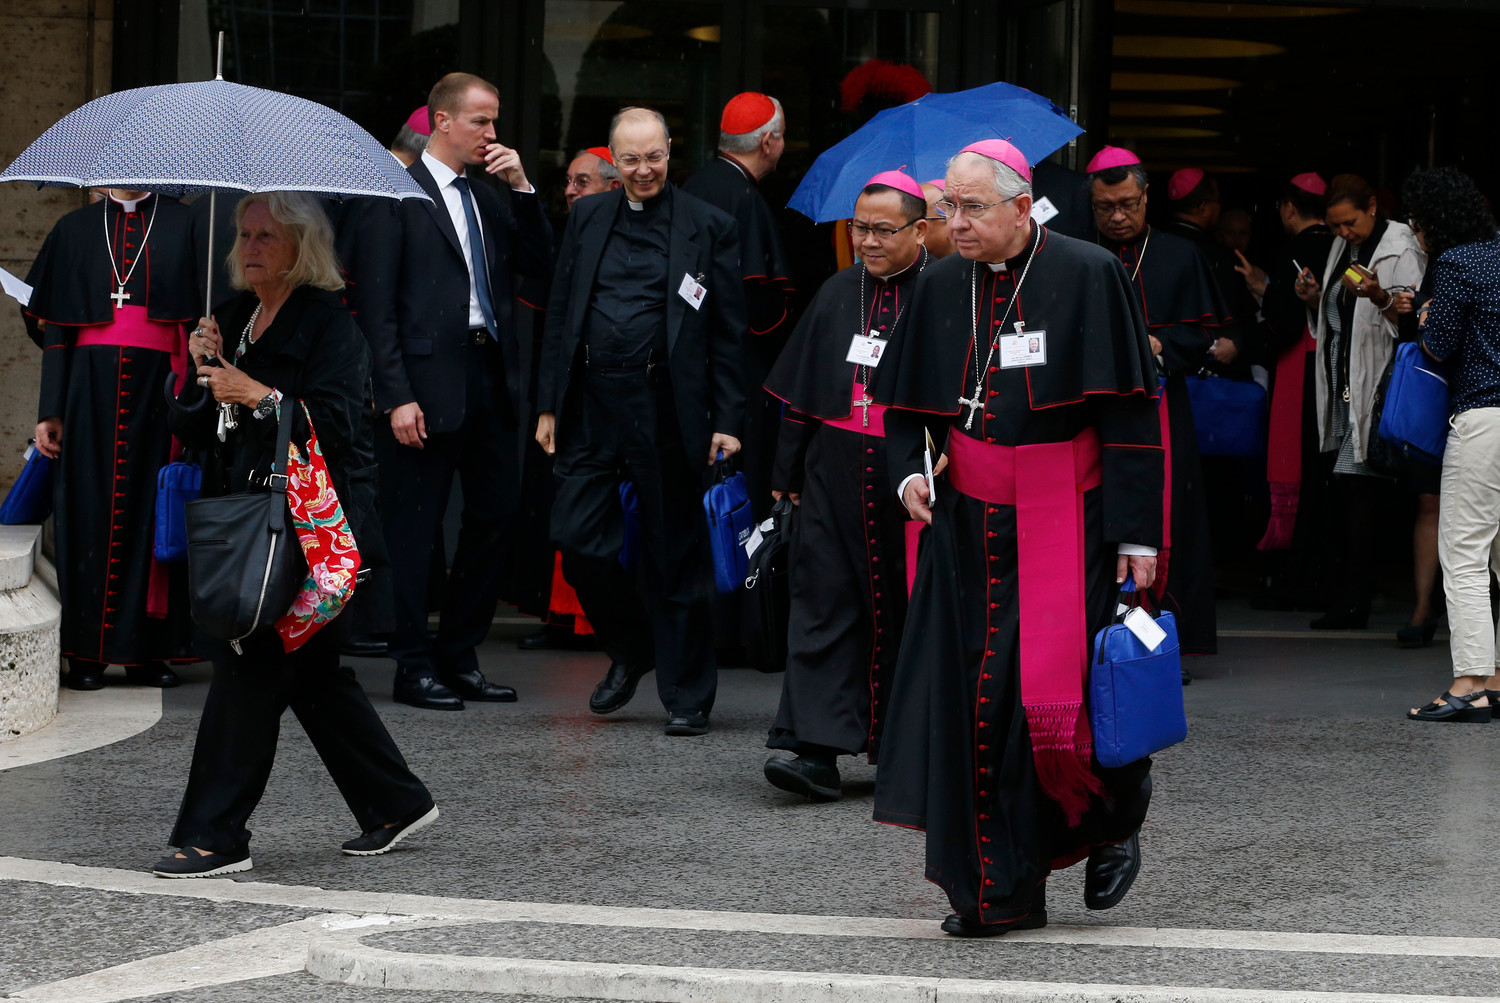 Archbishop Jose H. Gomez of Los Angeles, vice president of the conference, leaves a session of the Synod of Bishops on young people, the faith and vocational discernment at the Vatican Oct. 11. In his speech at the synod Archbishop Gomez called for Church leaders to model holiness by living the Gospel they preach.